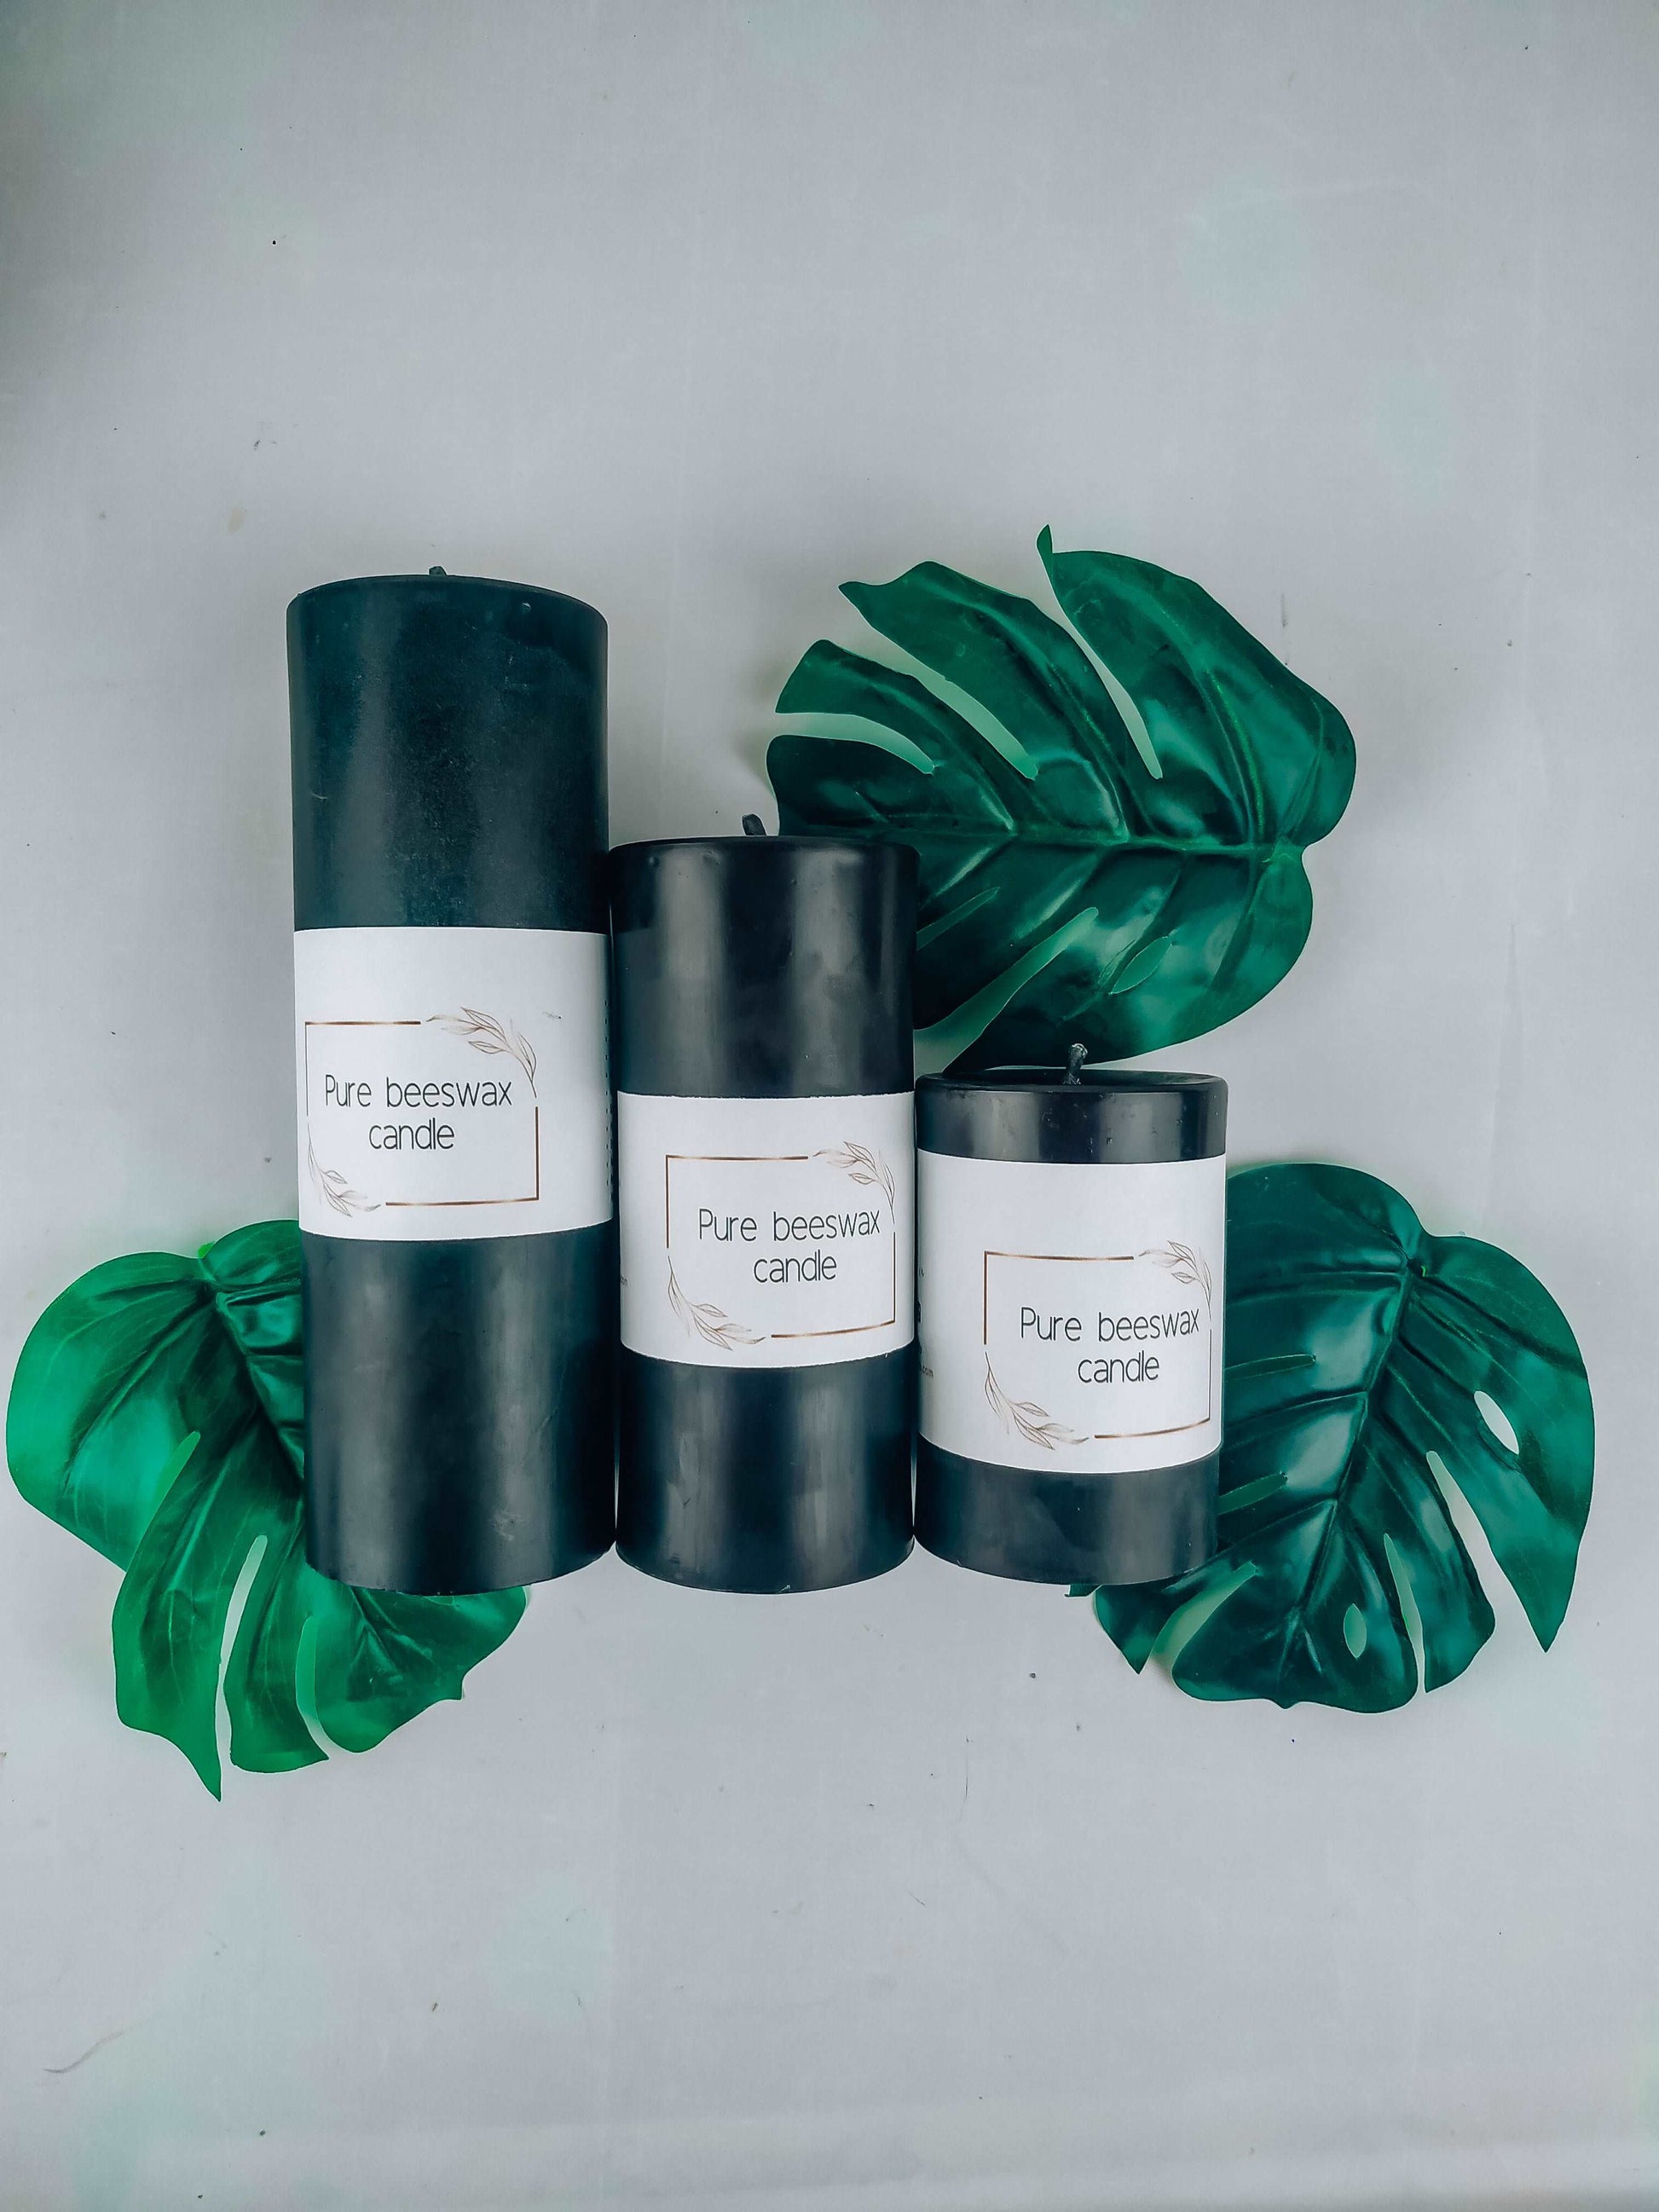 black pillar, black candle, rituals candle, black design, black luxury home, home decour, pure beeswax candles, black magic, long time burning candles, dripless candles, handmade, home inspo